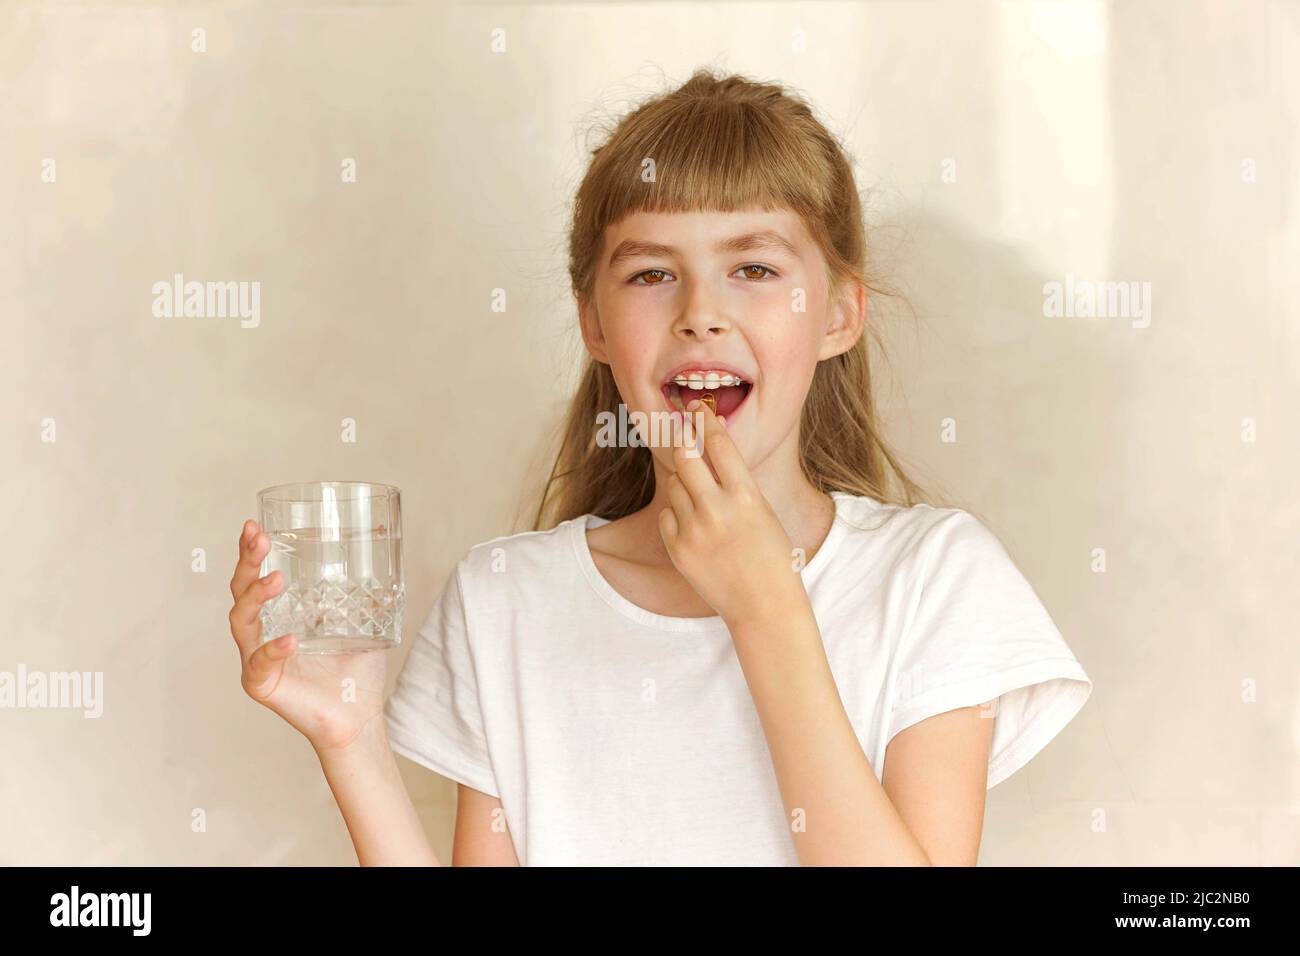 Little girl drinks omega 3 water and smiles. Stock Photo